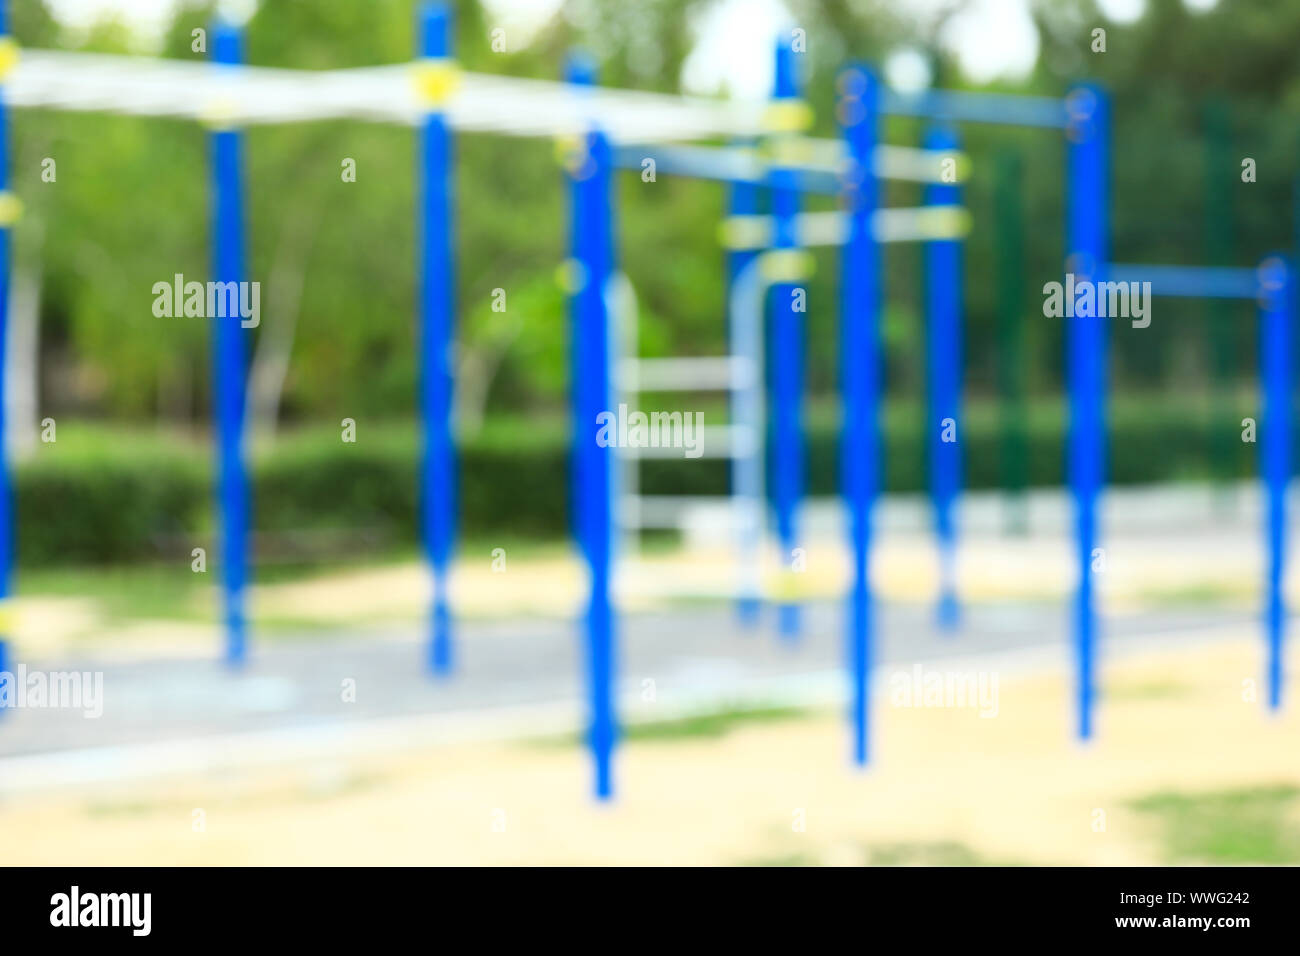 Blurred view of monkey bars on playground in park Stock Photo